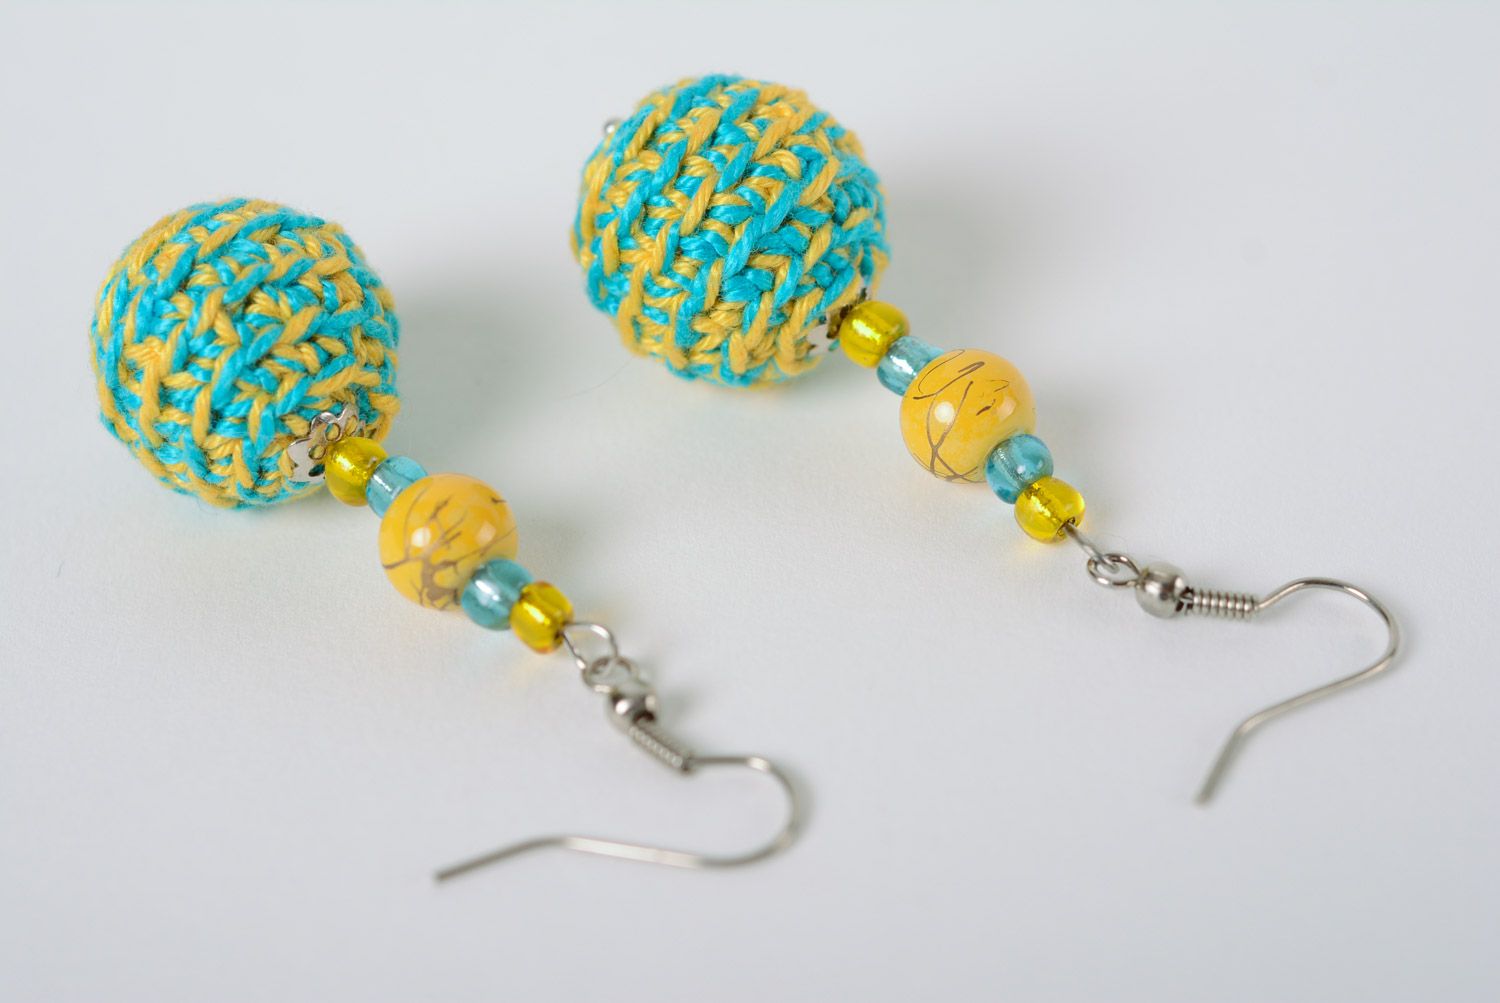 Handmade beaded earrings crocheted over with yellow and blue cotton threads photo 2